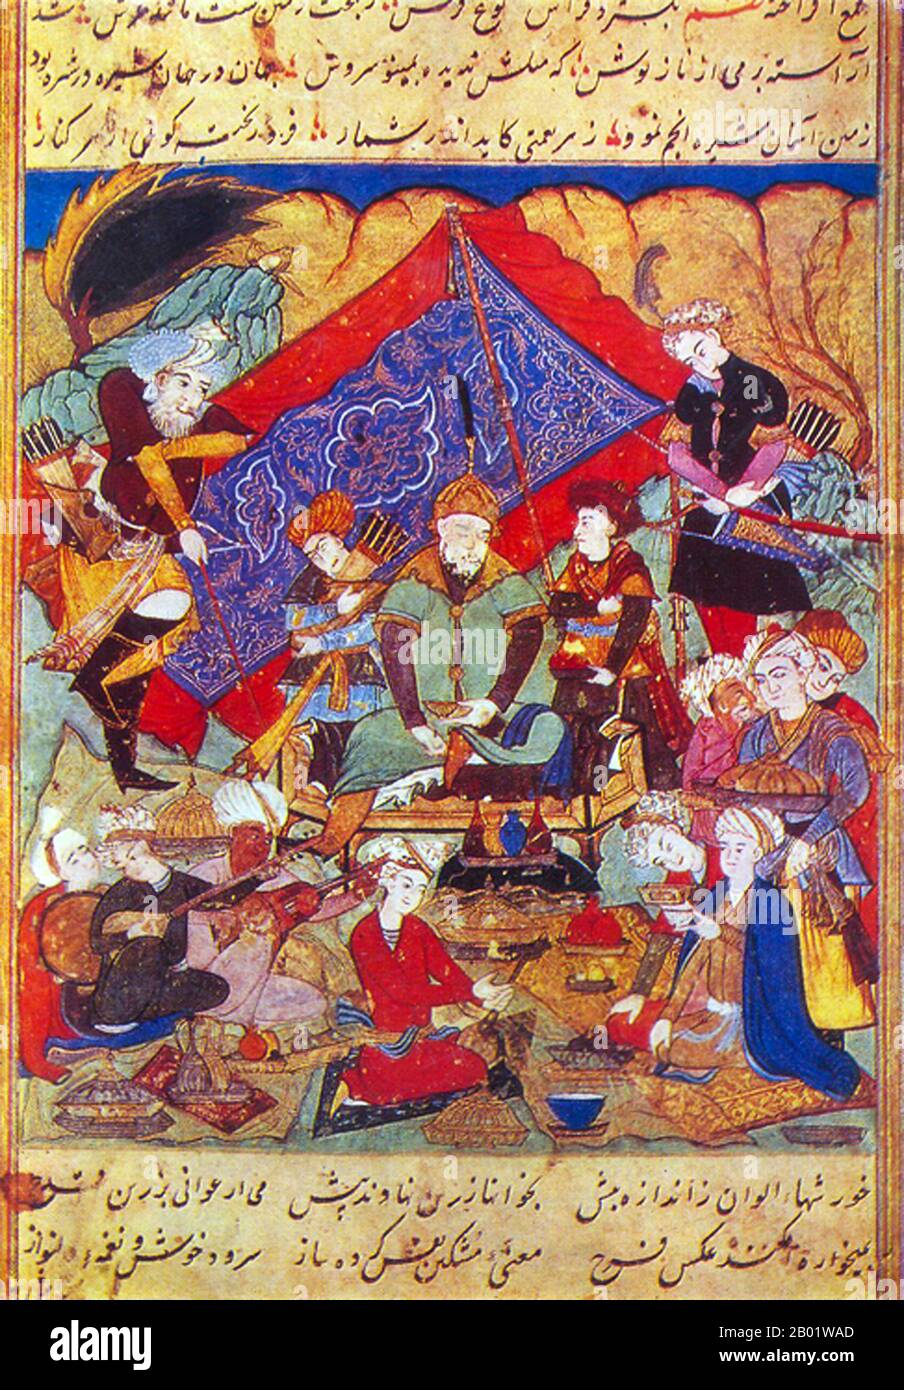 Uzbekistan: The Amir Timur feasting in Samarkand. Persian miniature painting from the 'Zafarnama' by Sahruf ad-din Ali Yesdy, 1628.  Timur (8 April 1336 - 18 February 1405), often known as Tamerlane (from Tīmur-e Lang) in English, was a fourteenth-century conqueror of Western, South and Central Asia, founder of the Timurid Empire and Timurid dynasty (r. 1370-1405) in Central Asia. He was great great grandfather of Babur, the founder of the Mughal Dynasty, which survived until 1857 as the Mughal Empire in India. Stock Photo